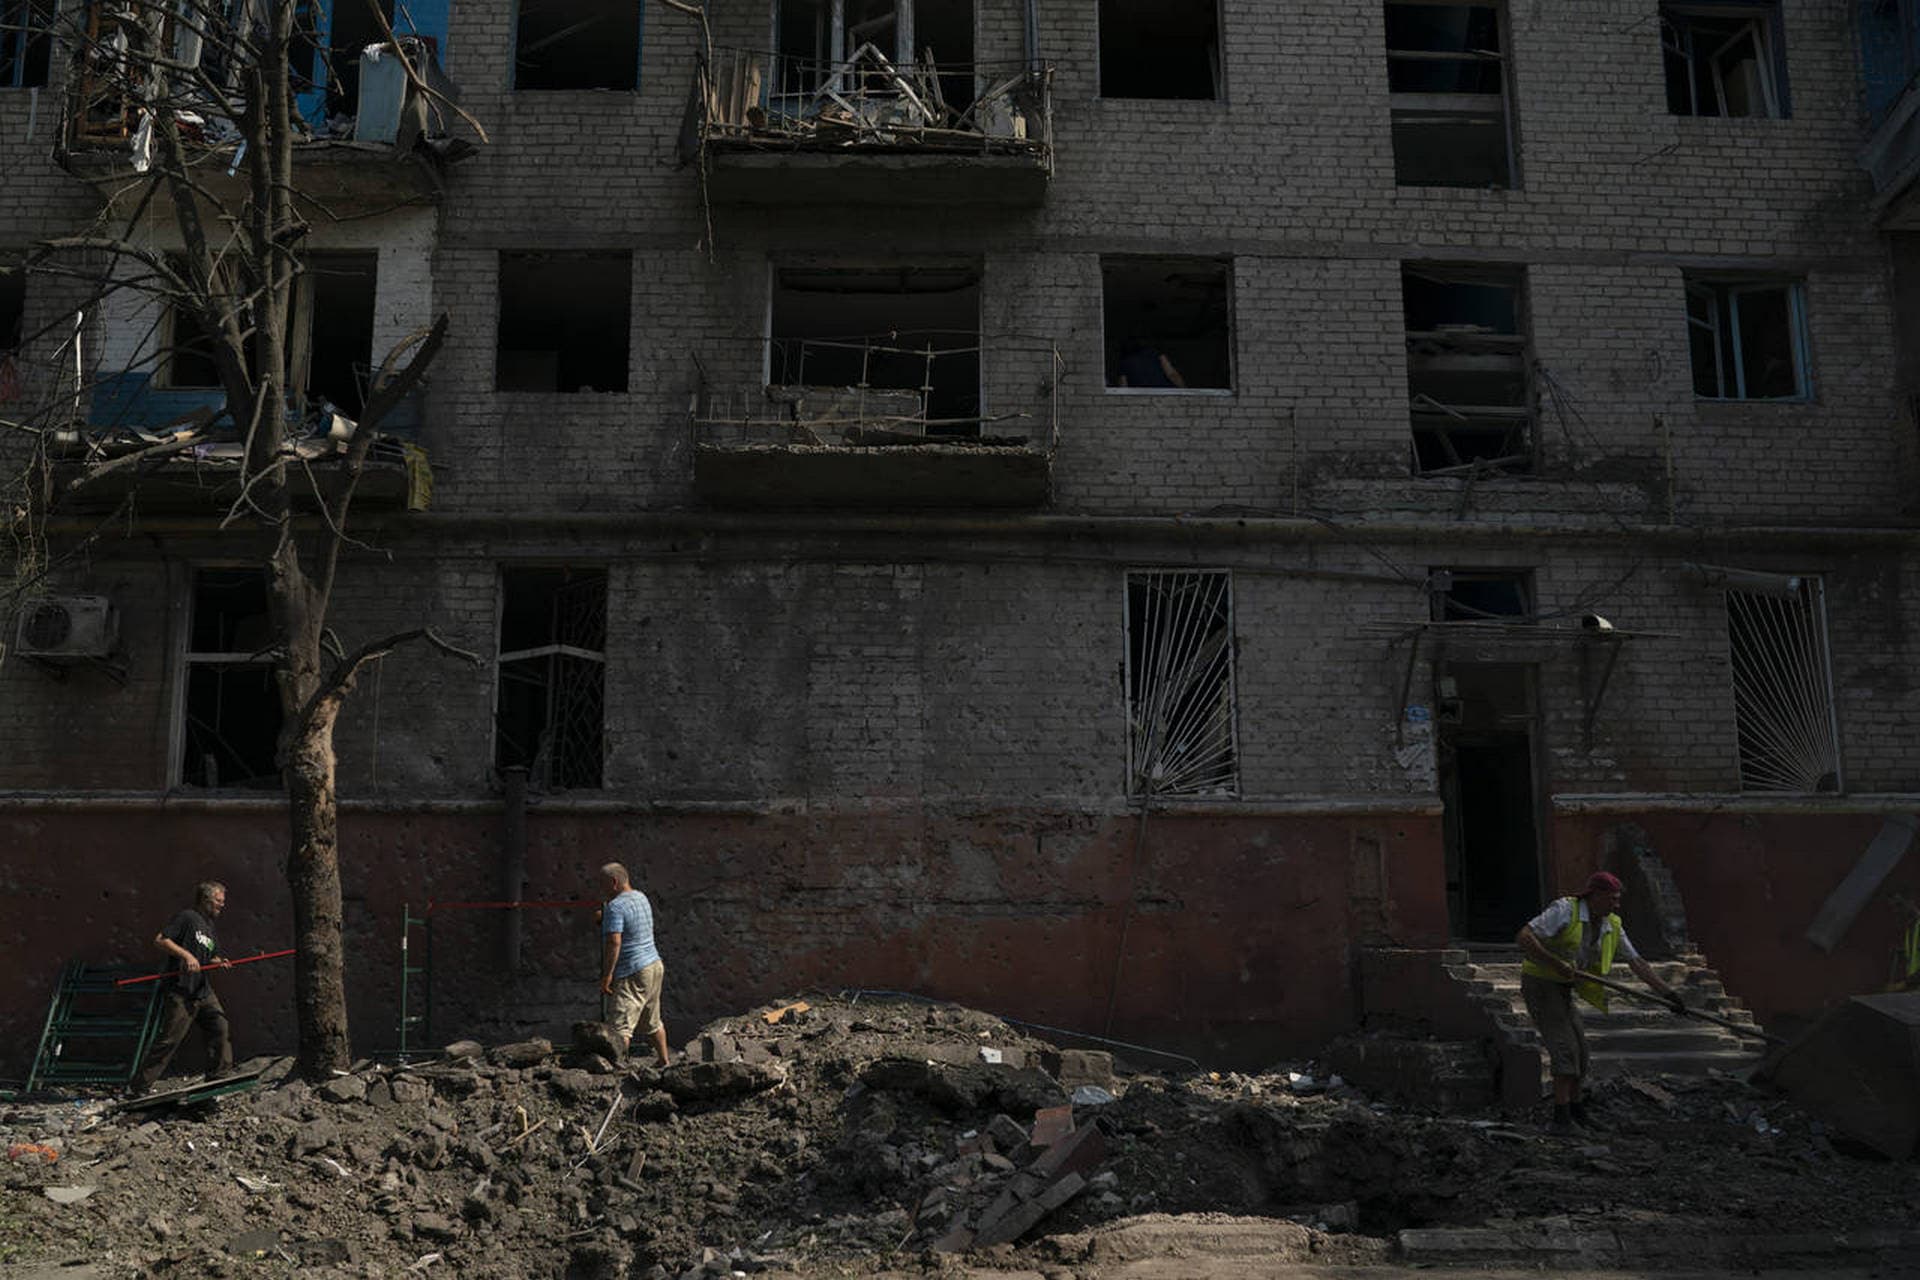 People work to clean up debris in front of a residential building that was damaged after a Russian attack in Kramatorsk